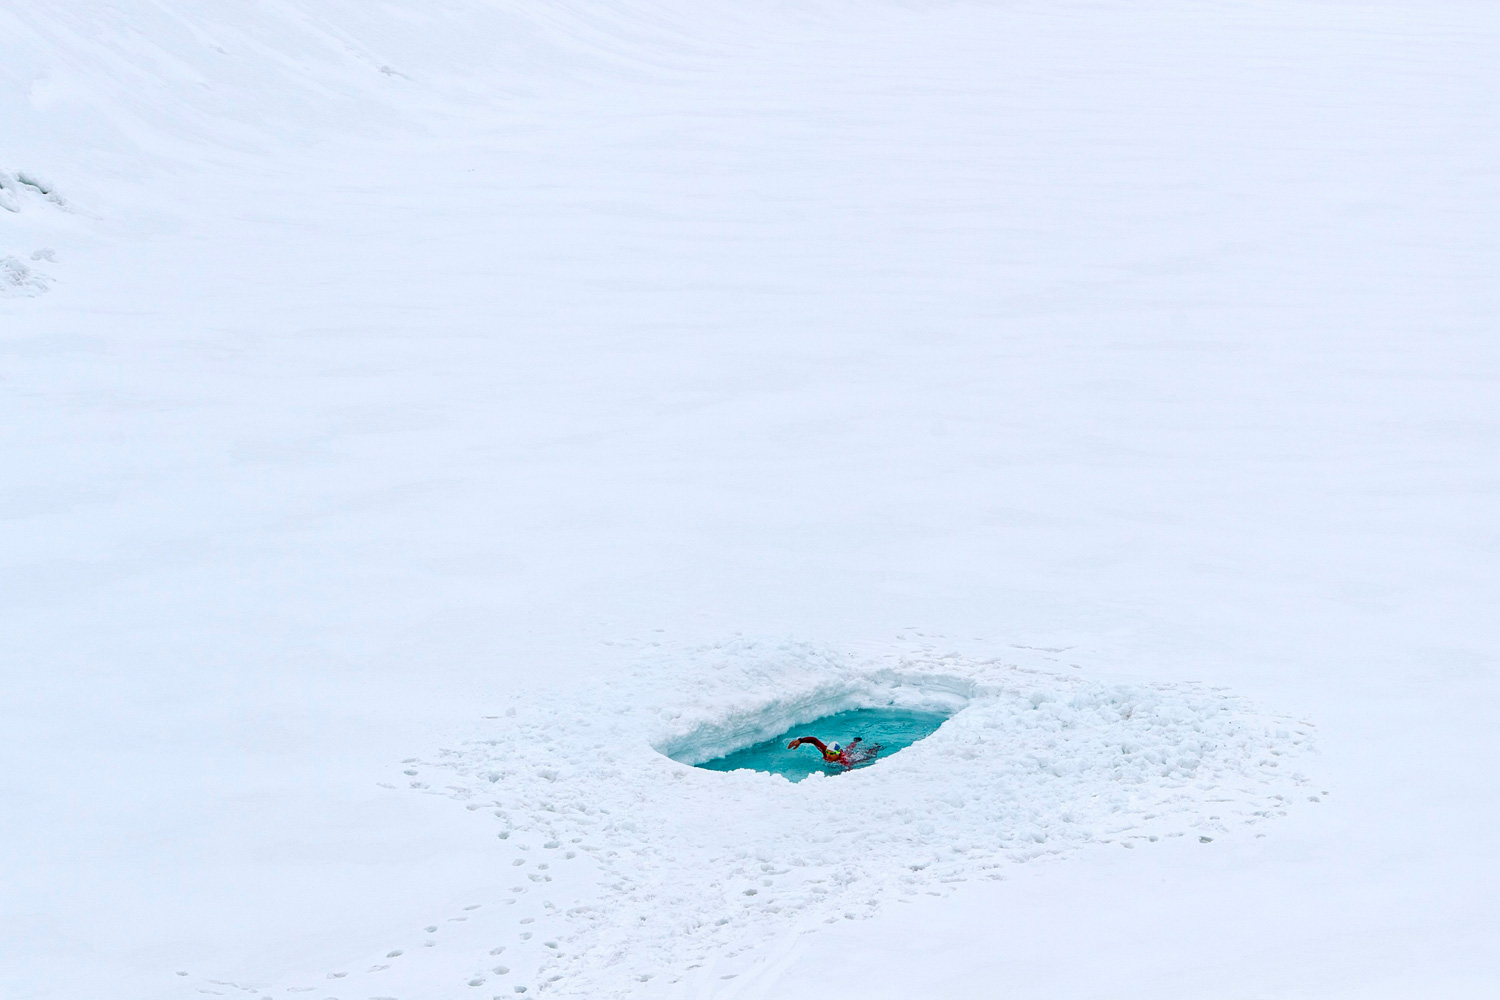 May 2, 2012. Ernst Bromeis is pictured in the ice-cold Toma Lake, at 2,345 m above sea level, near Disentis, Switzerland.